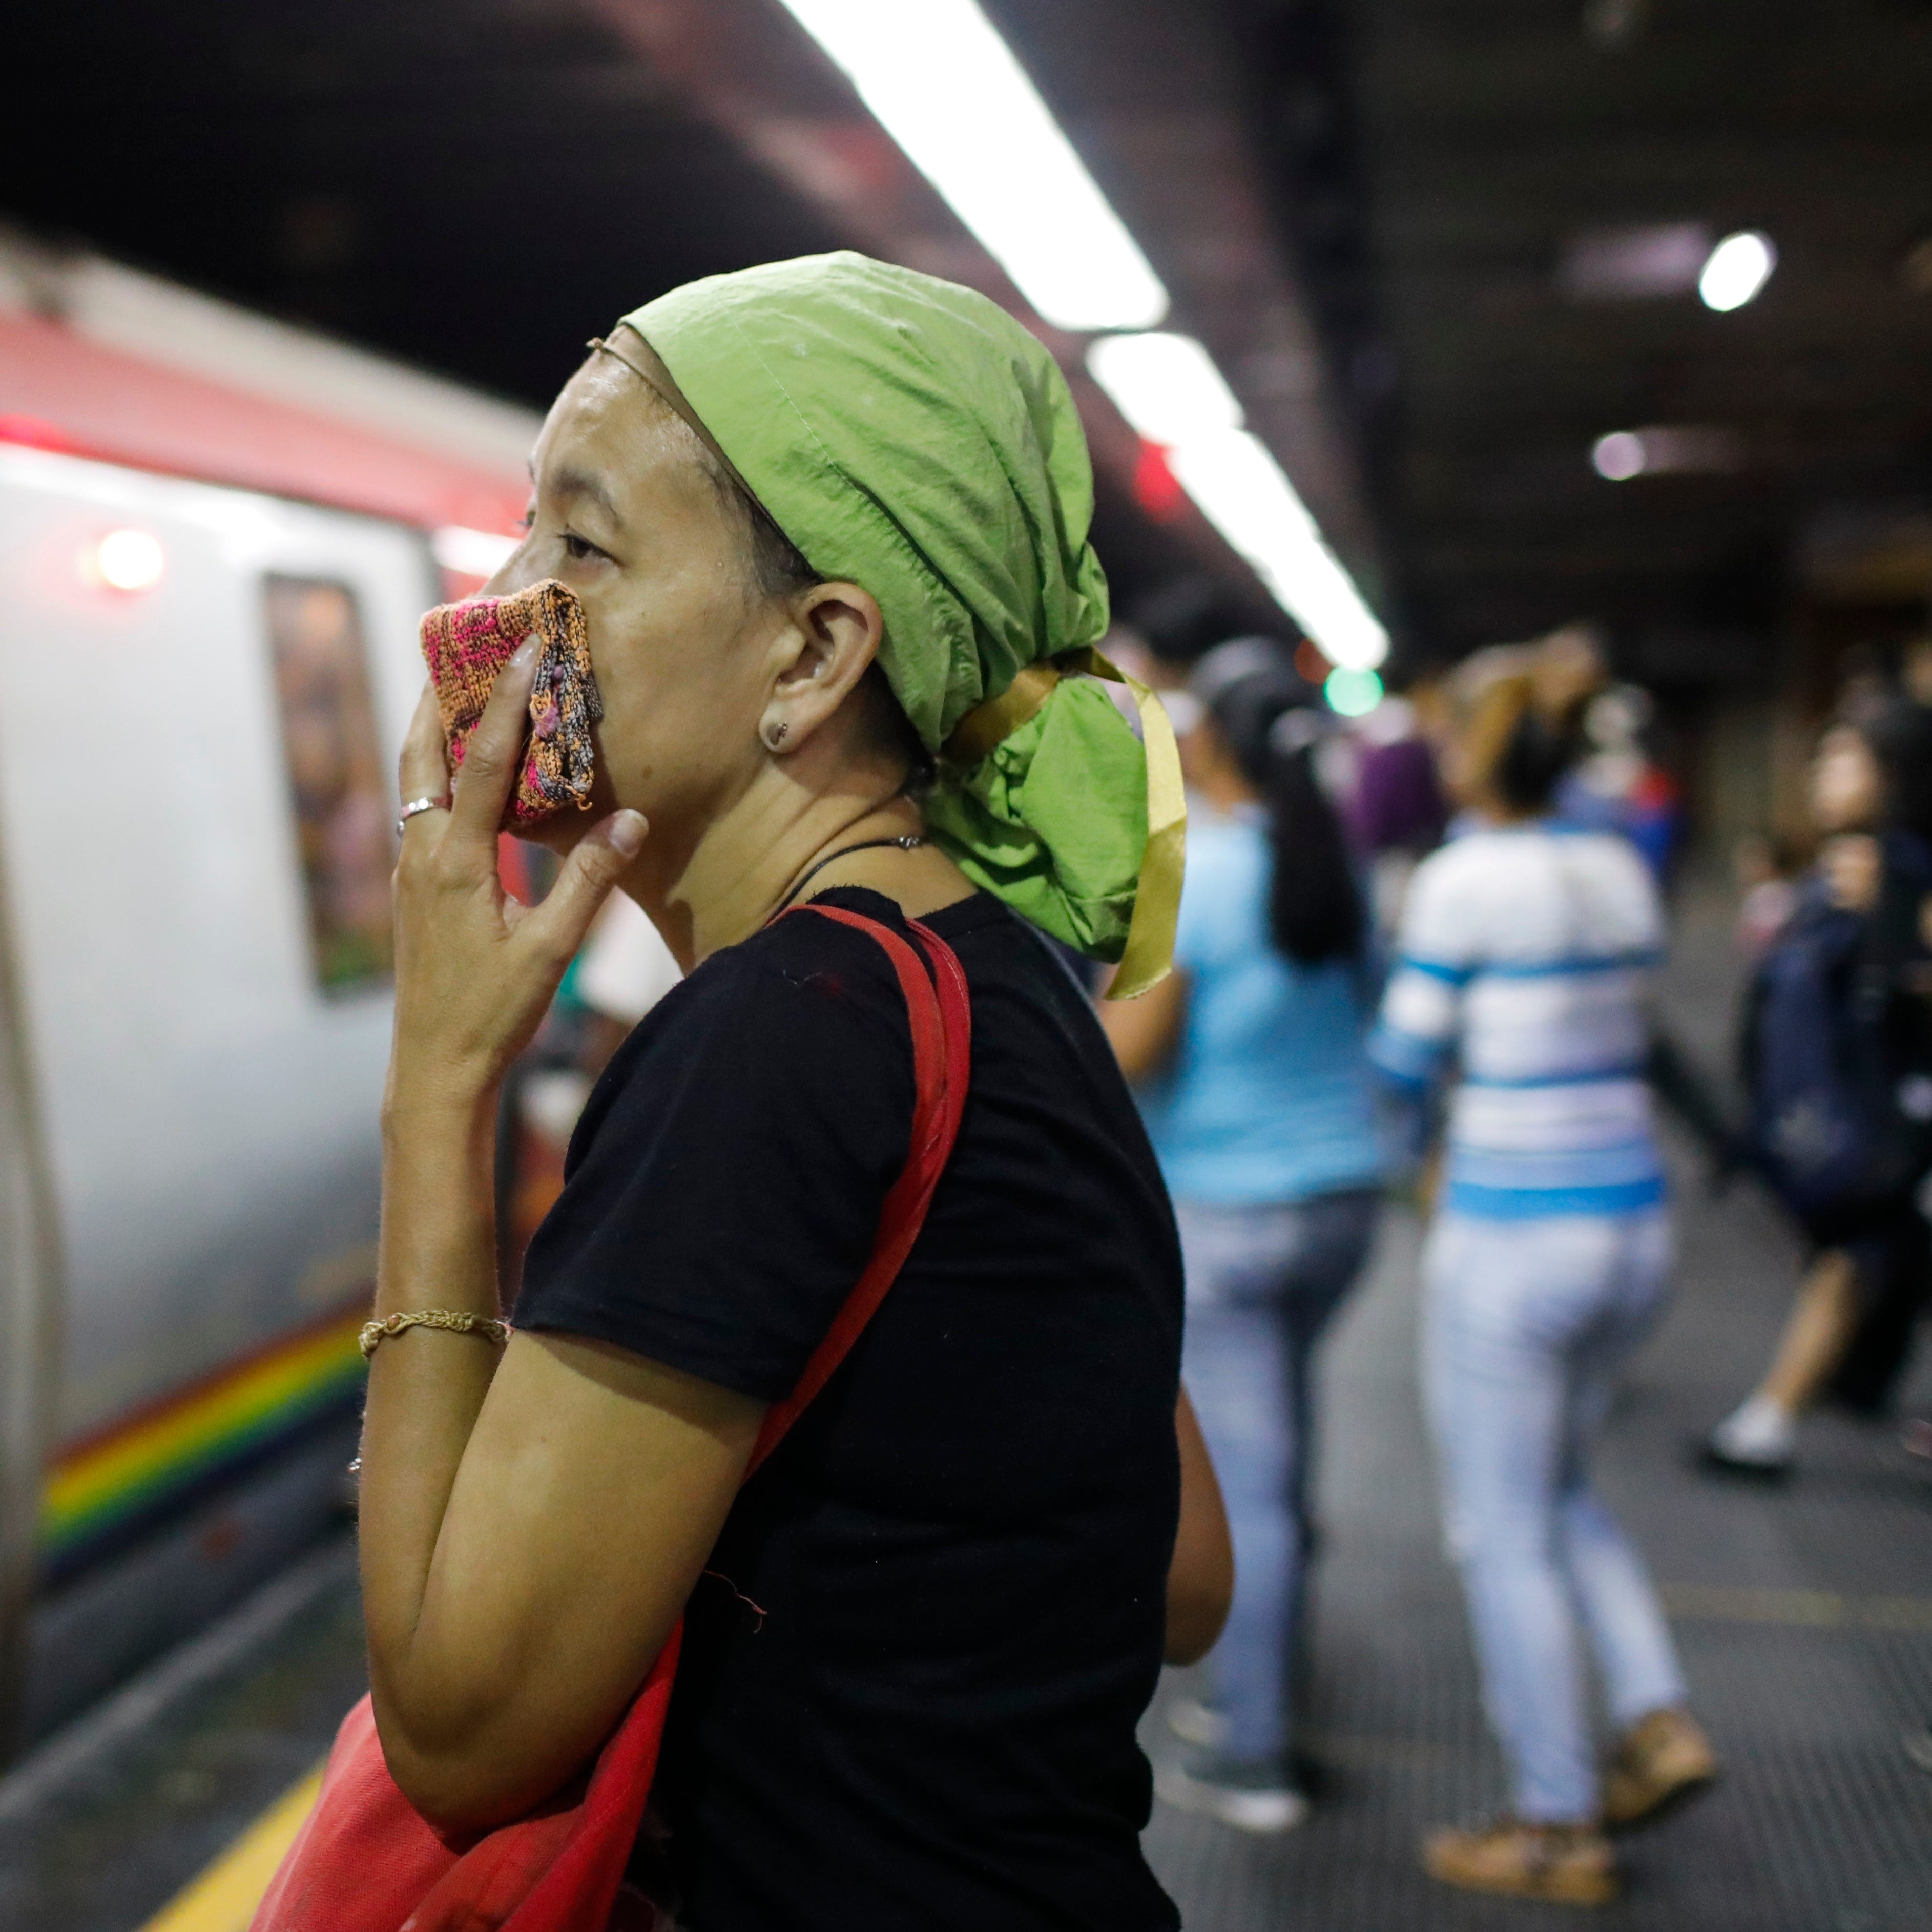 A woman covers her mouth and nose with a wash cloth on a subway platform in Caracas, Venezuela, Friday, March 13, 2020. Venezuela's Vice President Delcy Rodr’guez confirmed Friday the first two cases of the new coronavirus in the South American country. The vast majority of people recover from the new virus. 